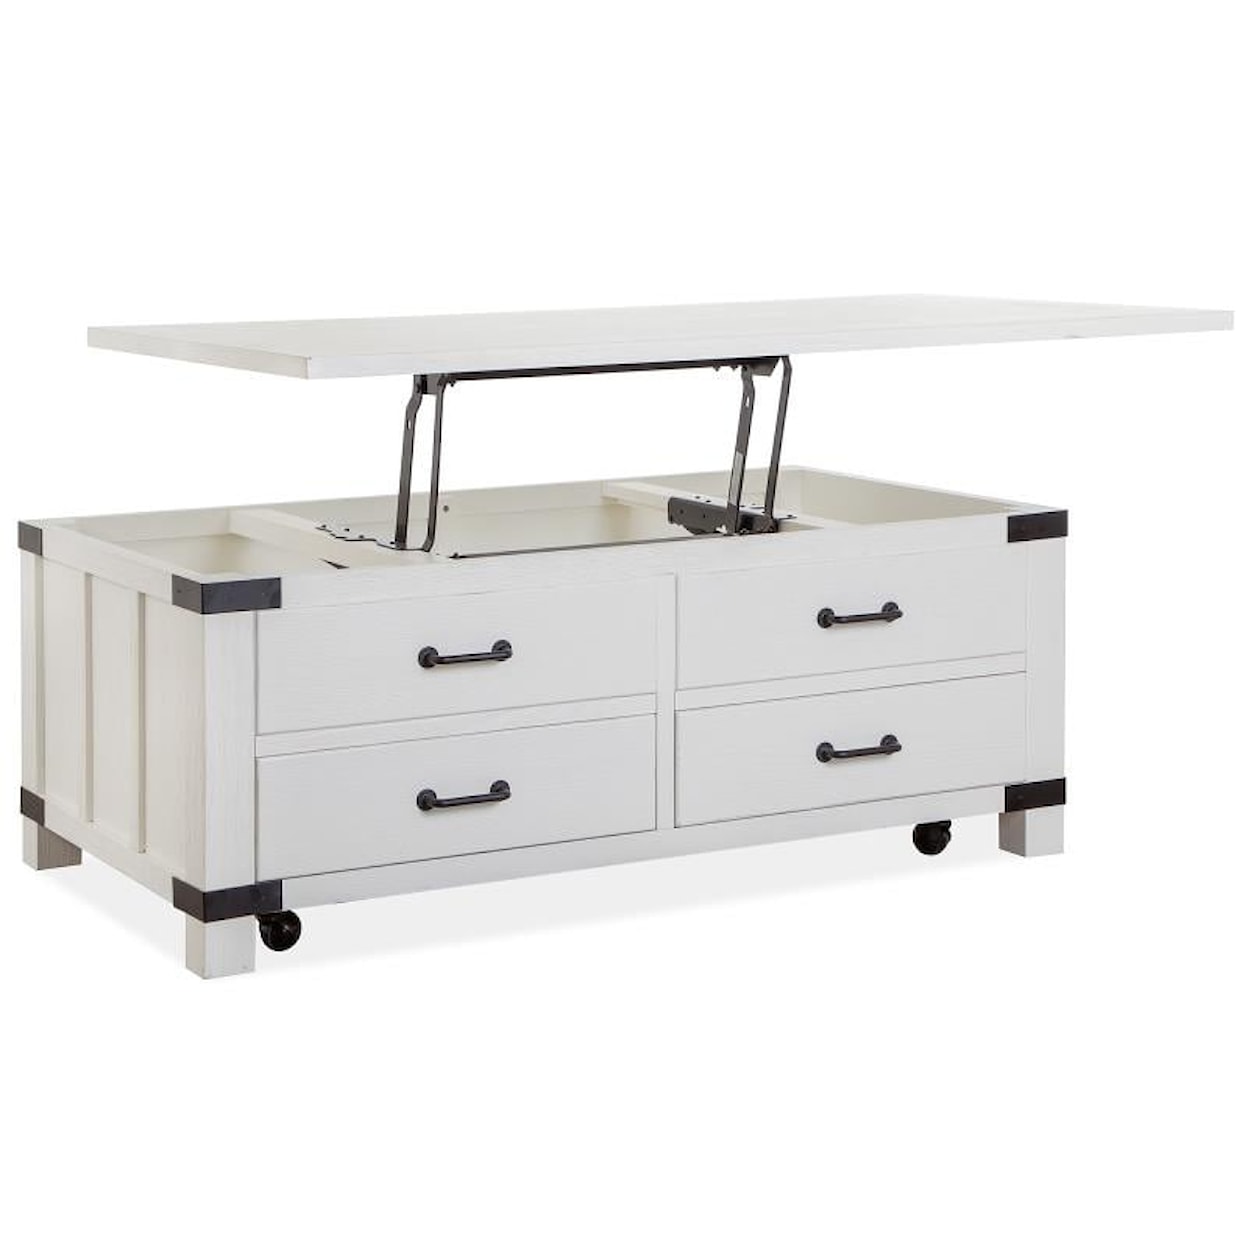 Magnussen Home Harper Springs Occasional Tables Lift Top Storage Cocktail Table w/Casters